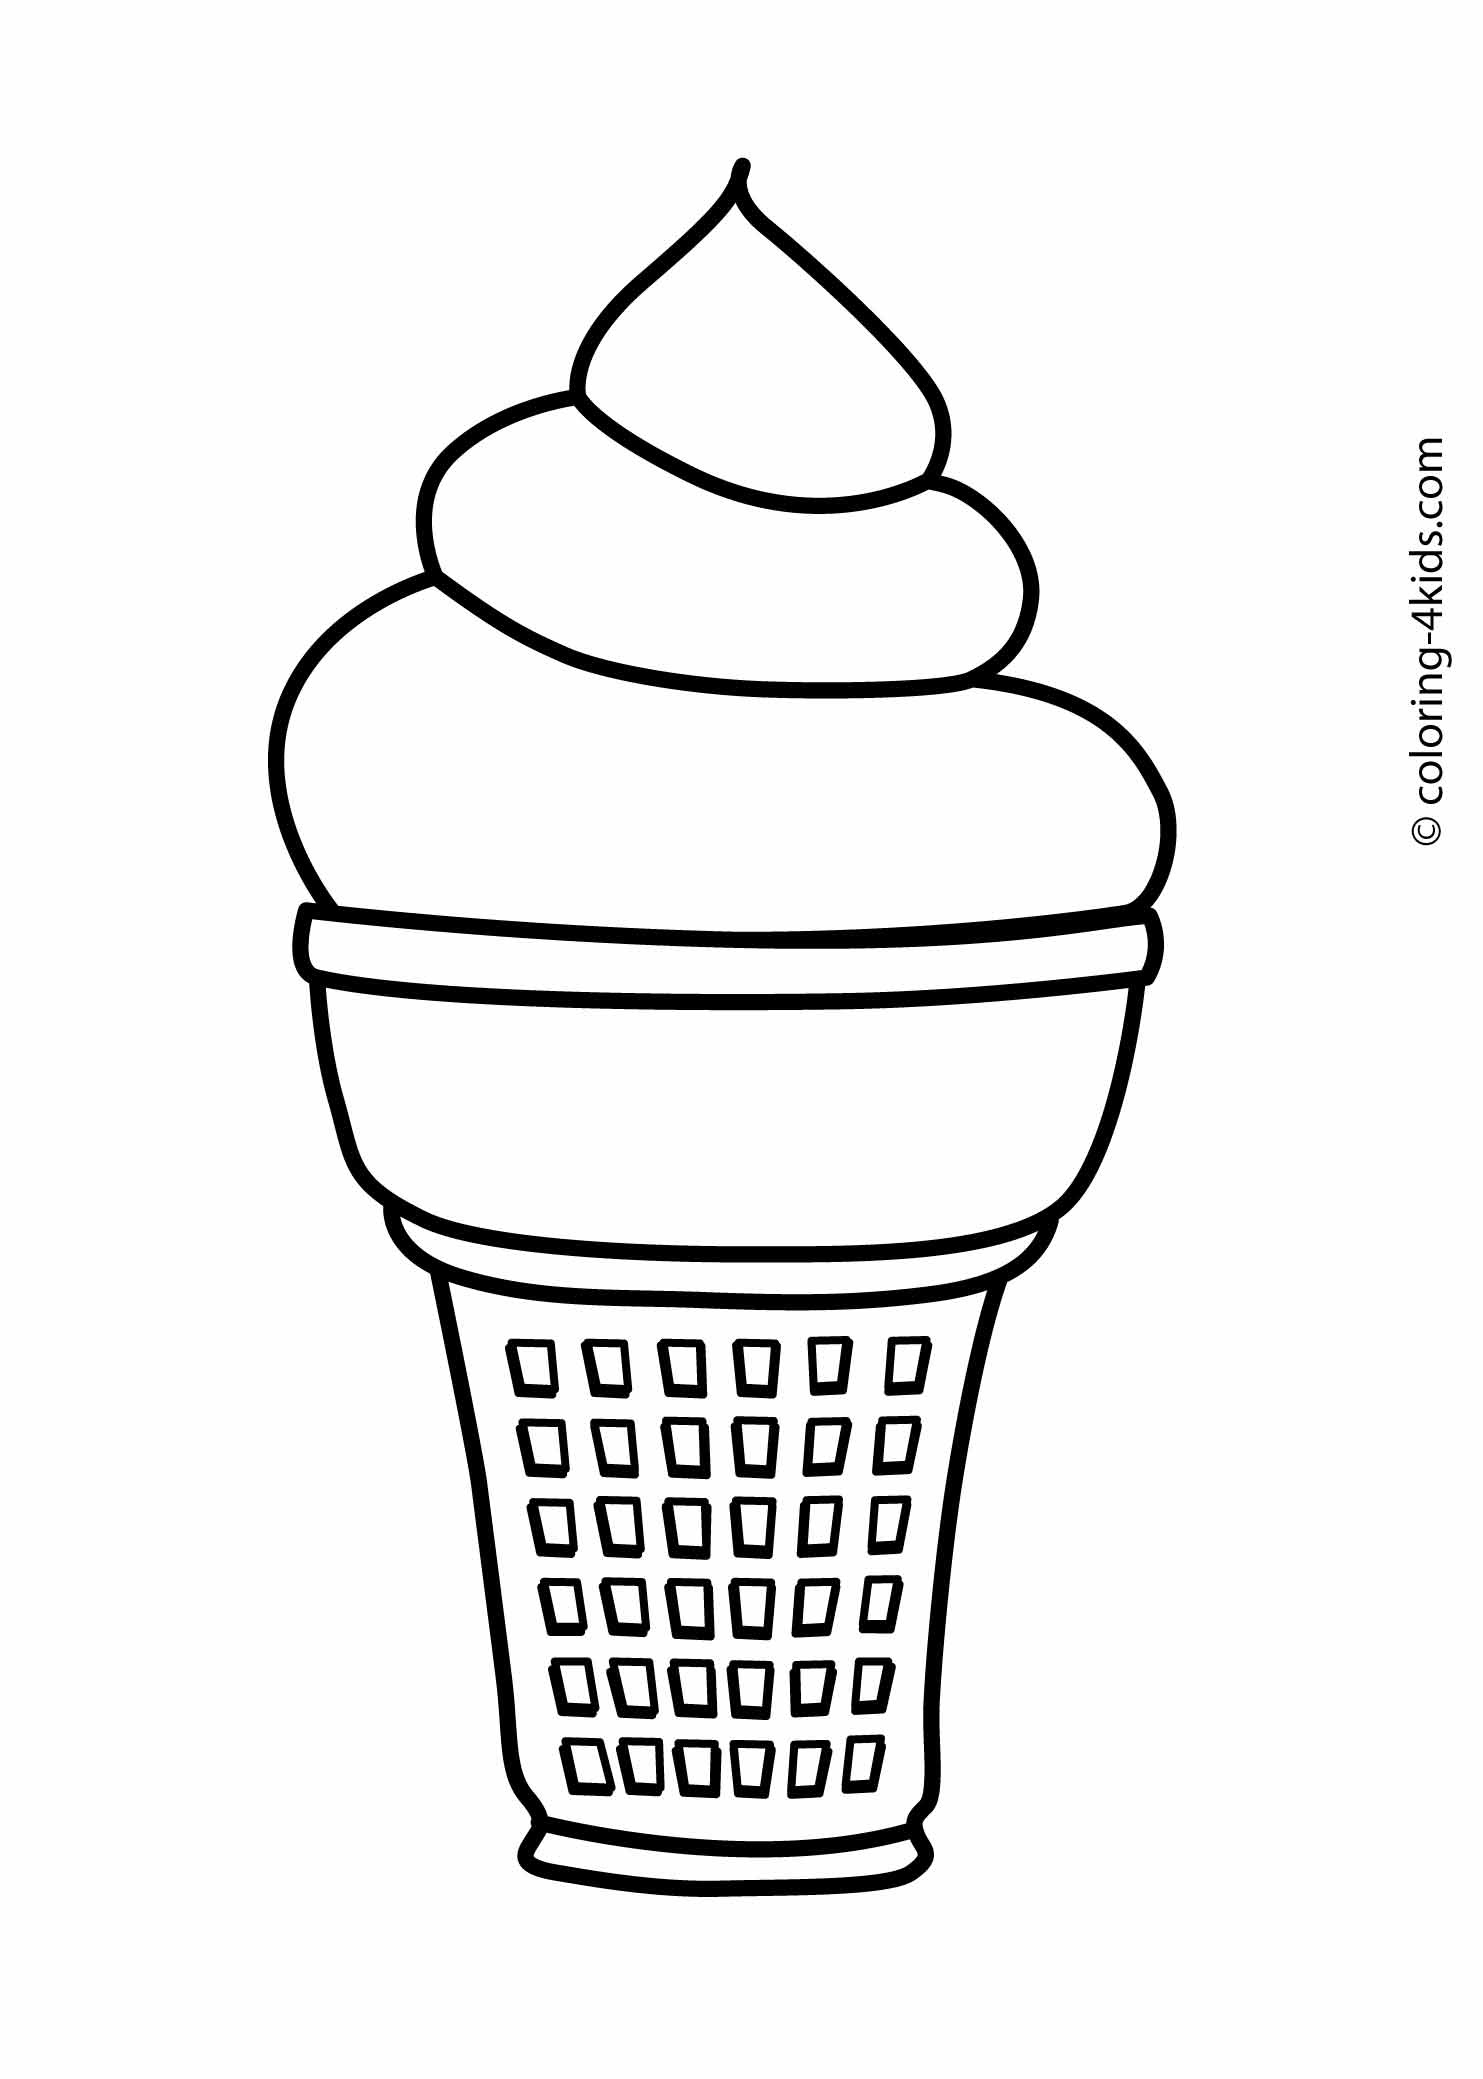 Download Icecream Cone Coloring Page at GetColorings.com | Free ...